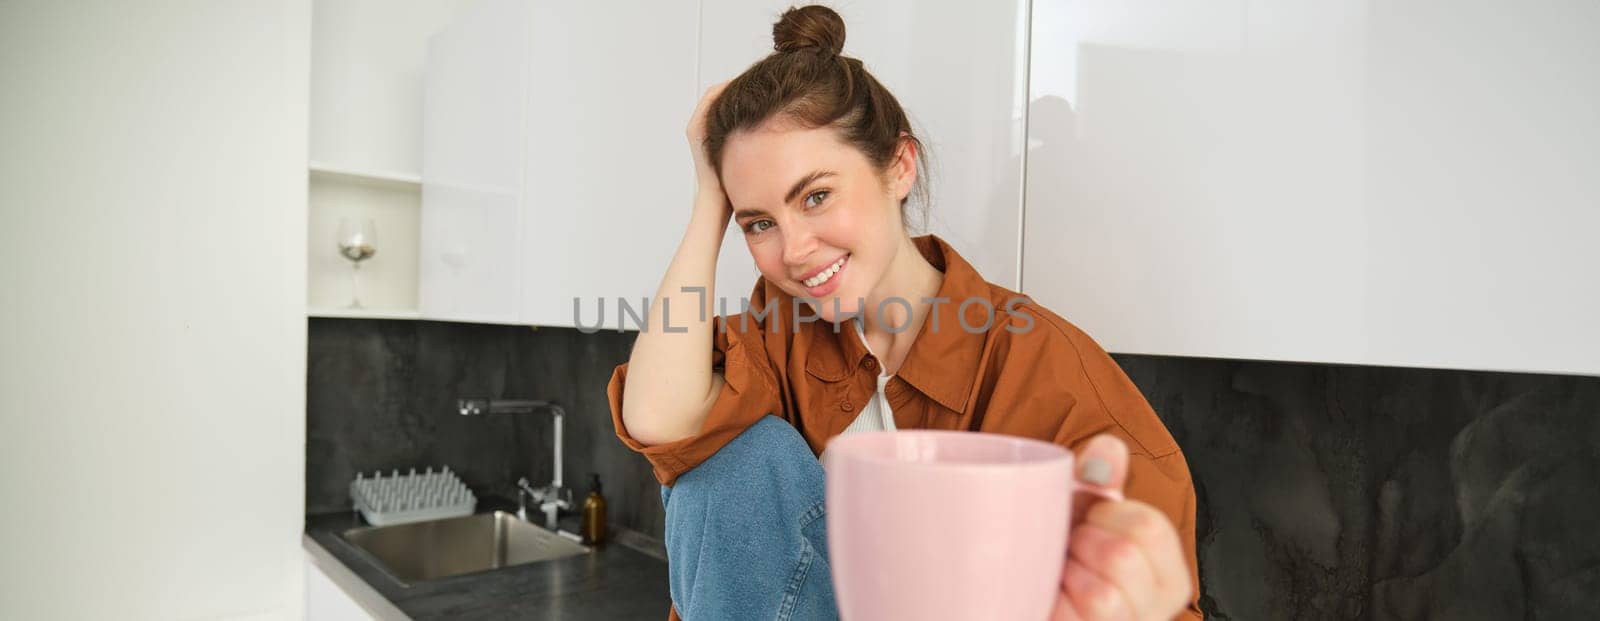 Pretty young smiling woman sits in kitchen, offers you cup of coffee, extends hand with pink mug, sharing her drink with someone.